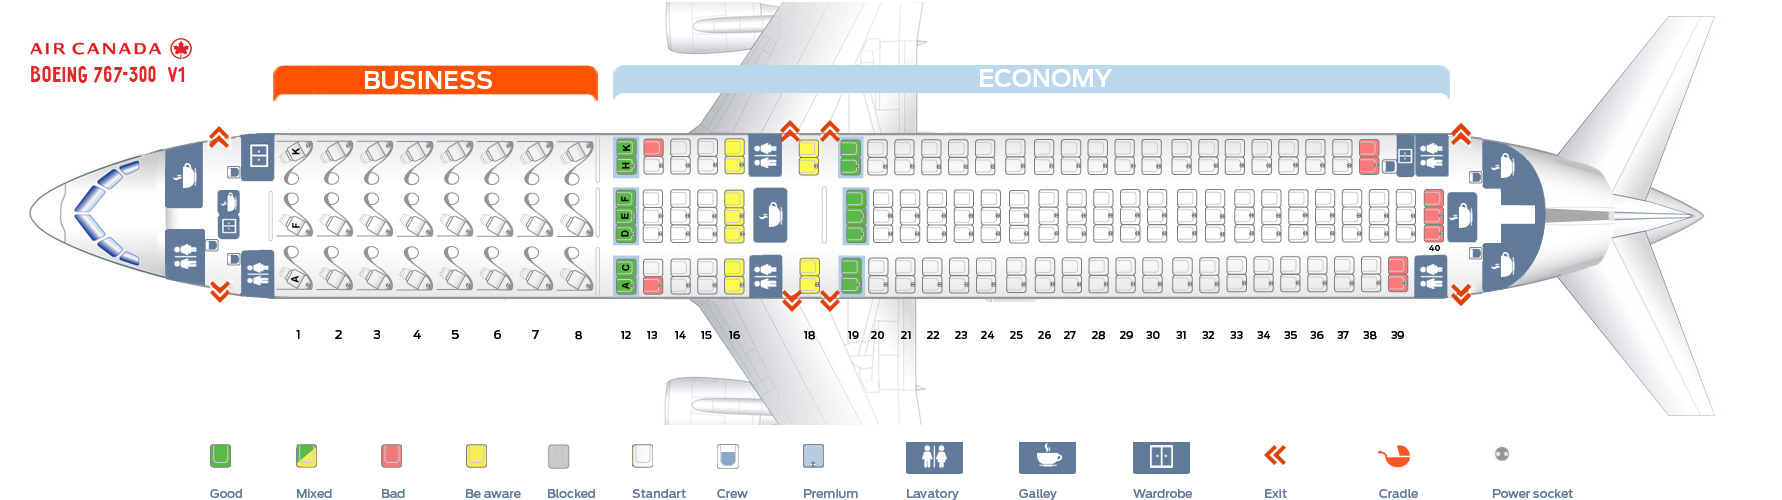 Boeing 767 Jet Seating Chart